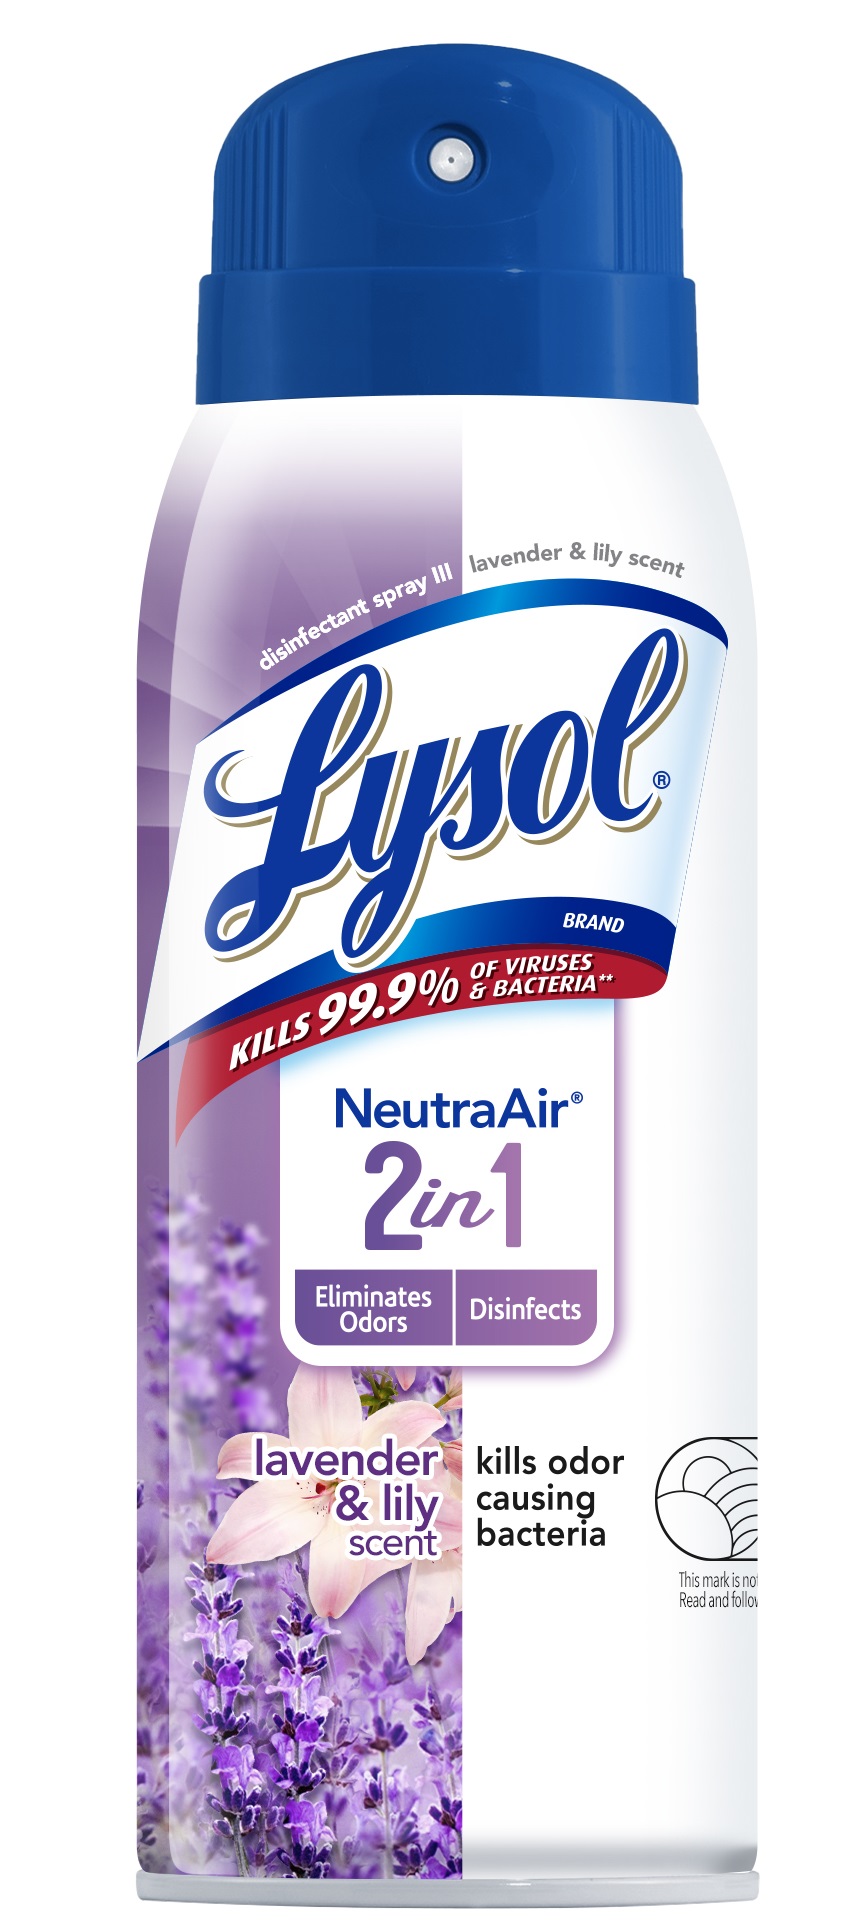 Lysol® Disinfectant Spray - Neutra Air®  2 in 1 - Lavender & Lily